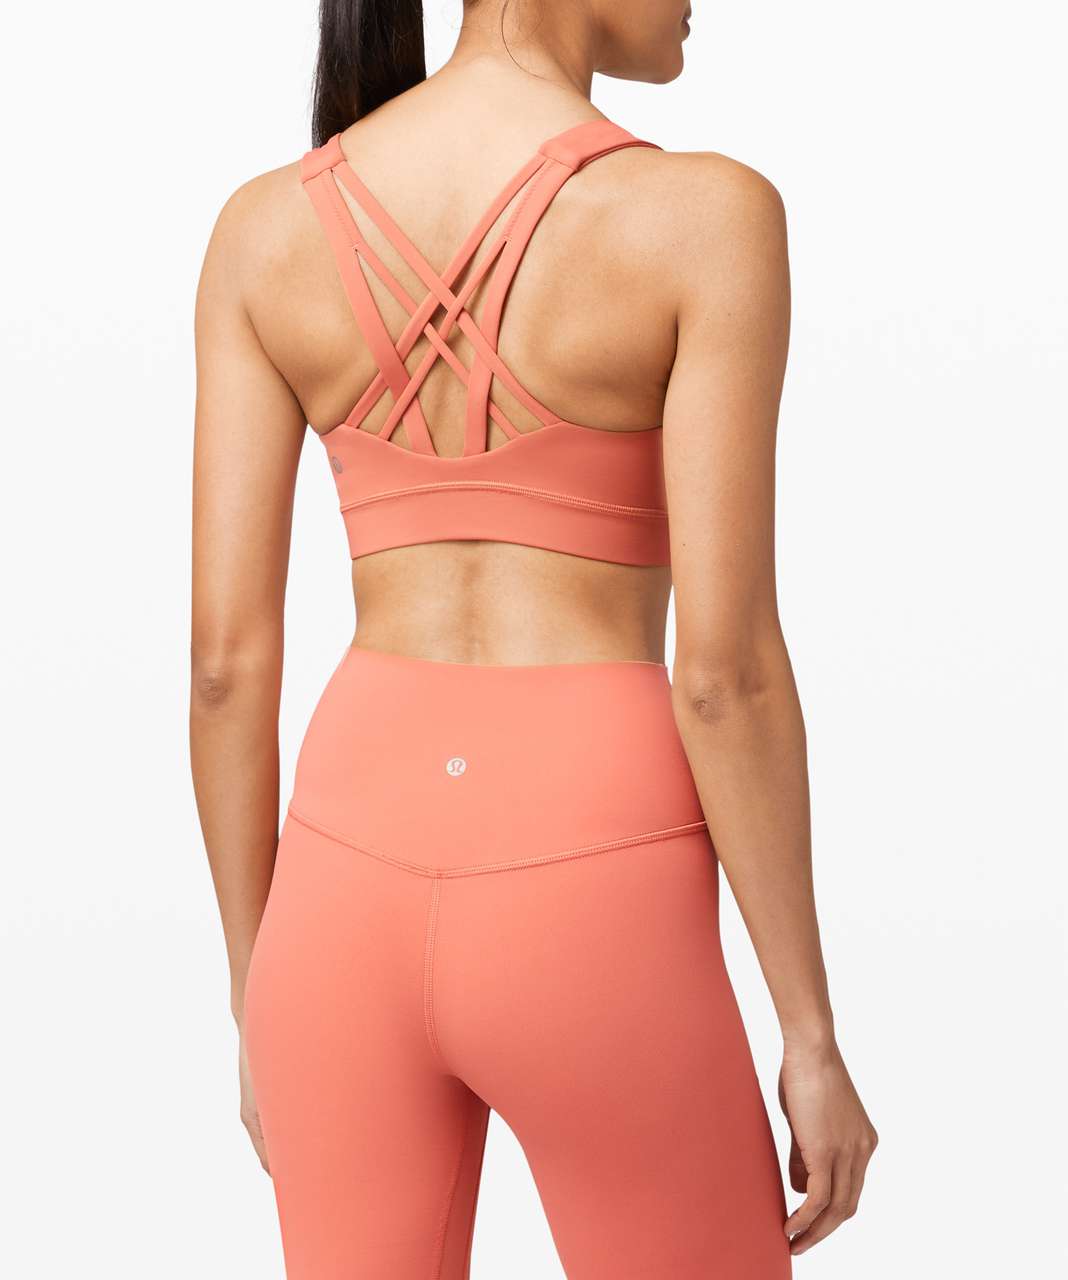 Lululemon Free To Be Elevated Bra *Light Support, DD Cup - Rustic Coral